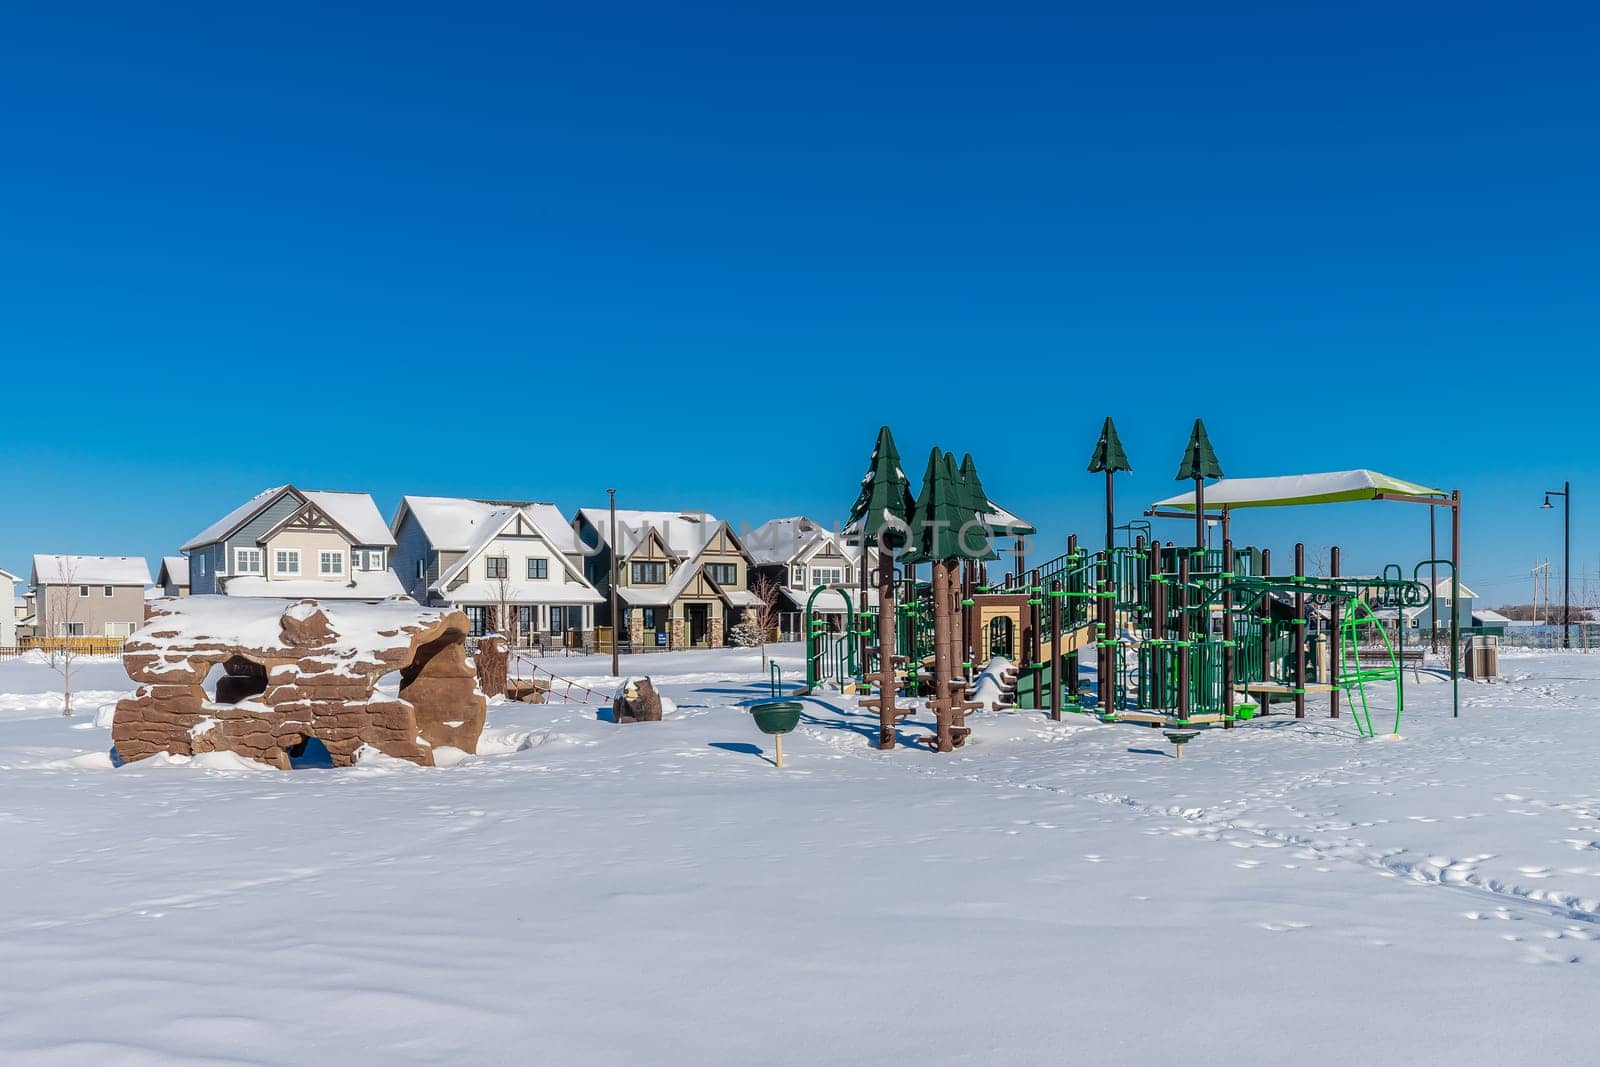 Experience the winter magic of Bear Paw Park in Saskatoon. This image captures the park's snowy landscape, frost-covered trees, and the serene beauty of a winter's day in the city.